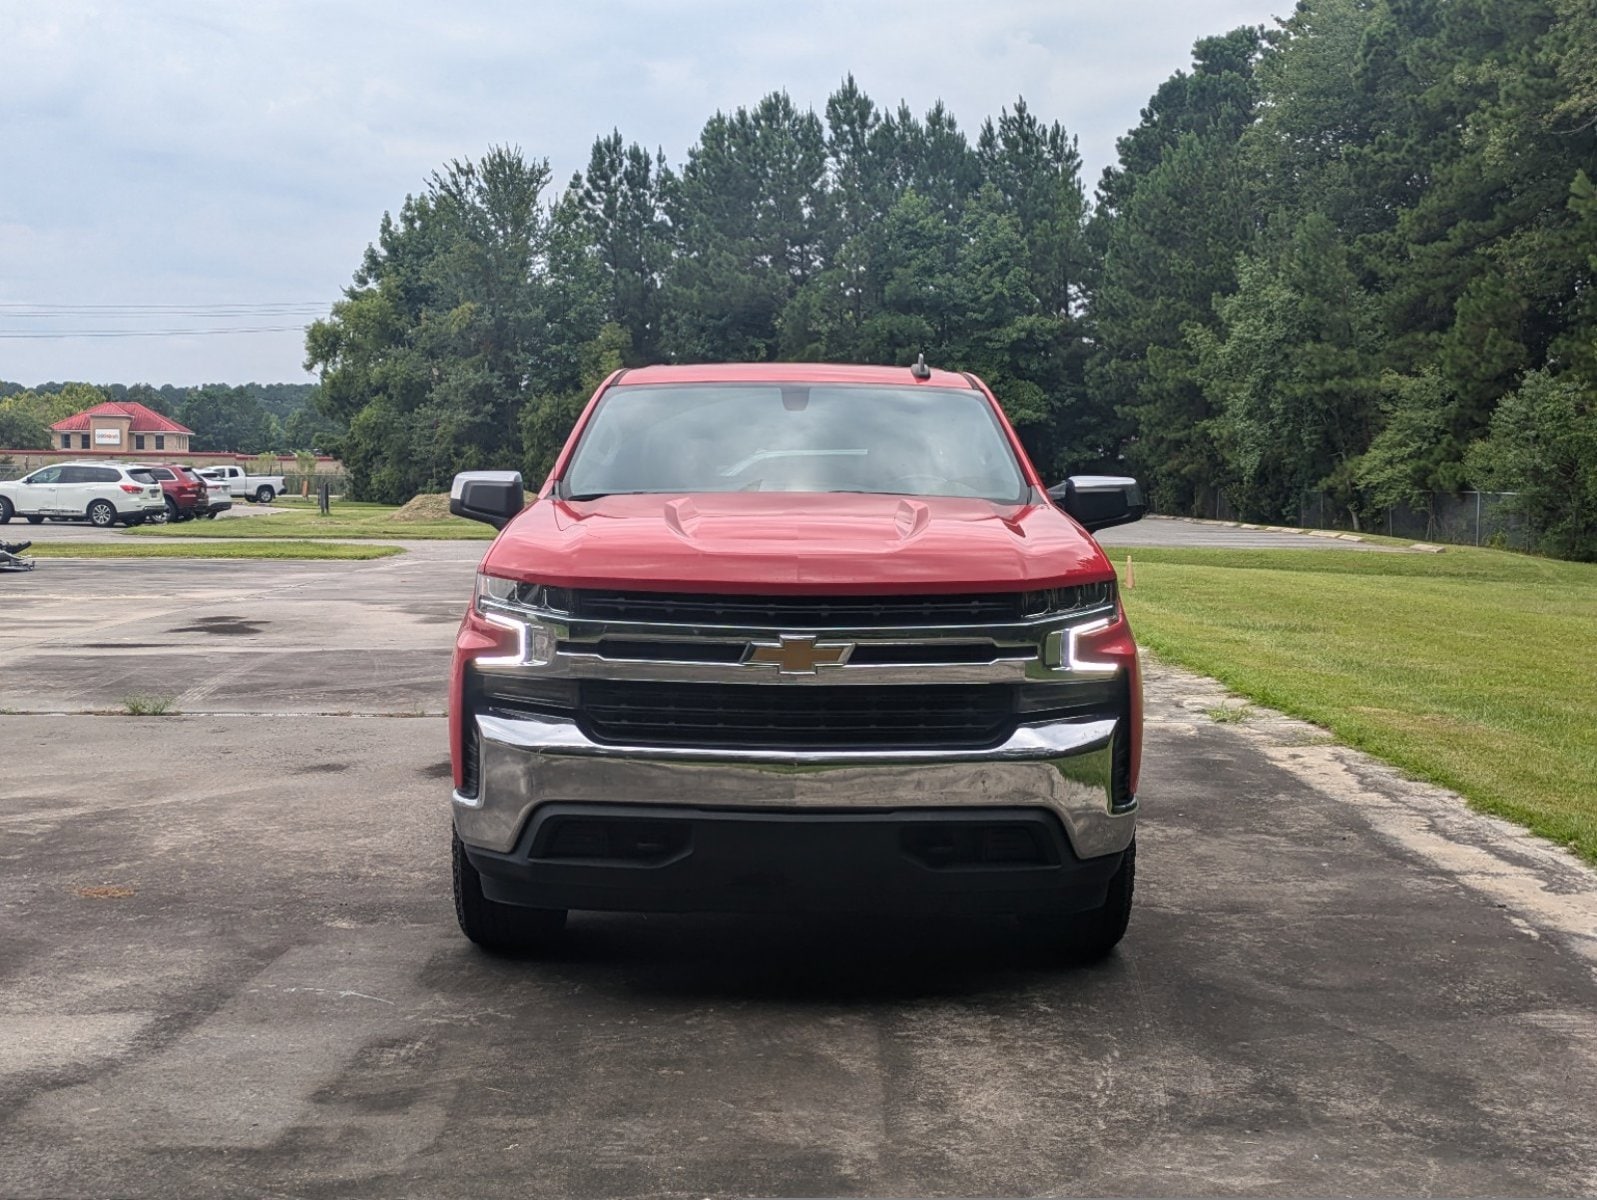 Used 2021 Chevrolet Silverado 1500 LT with VIN 1GCUYDEDXMZ451807 for sale in Hardeeville, SC